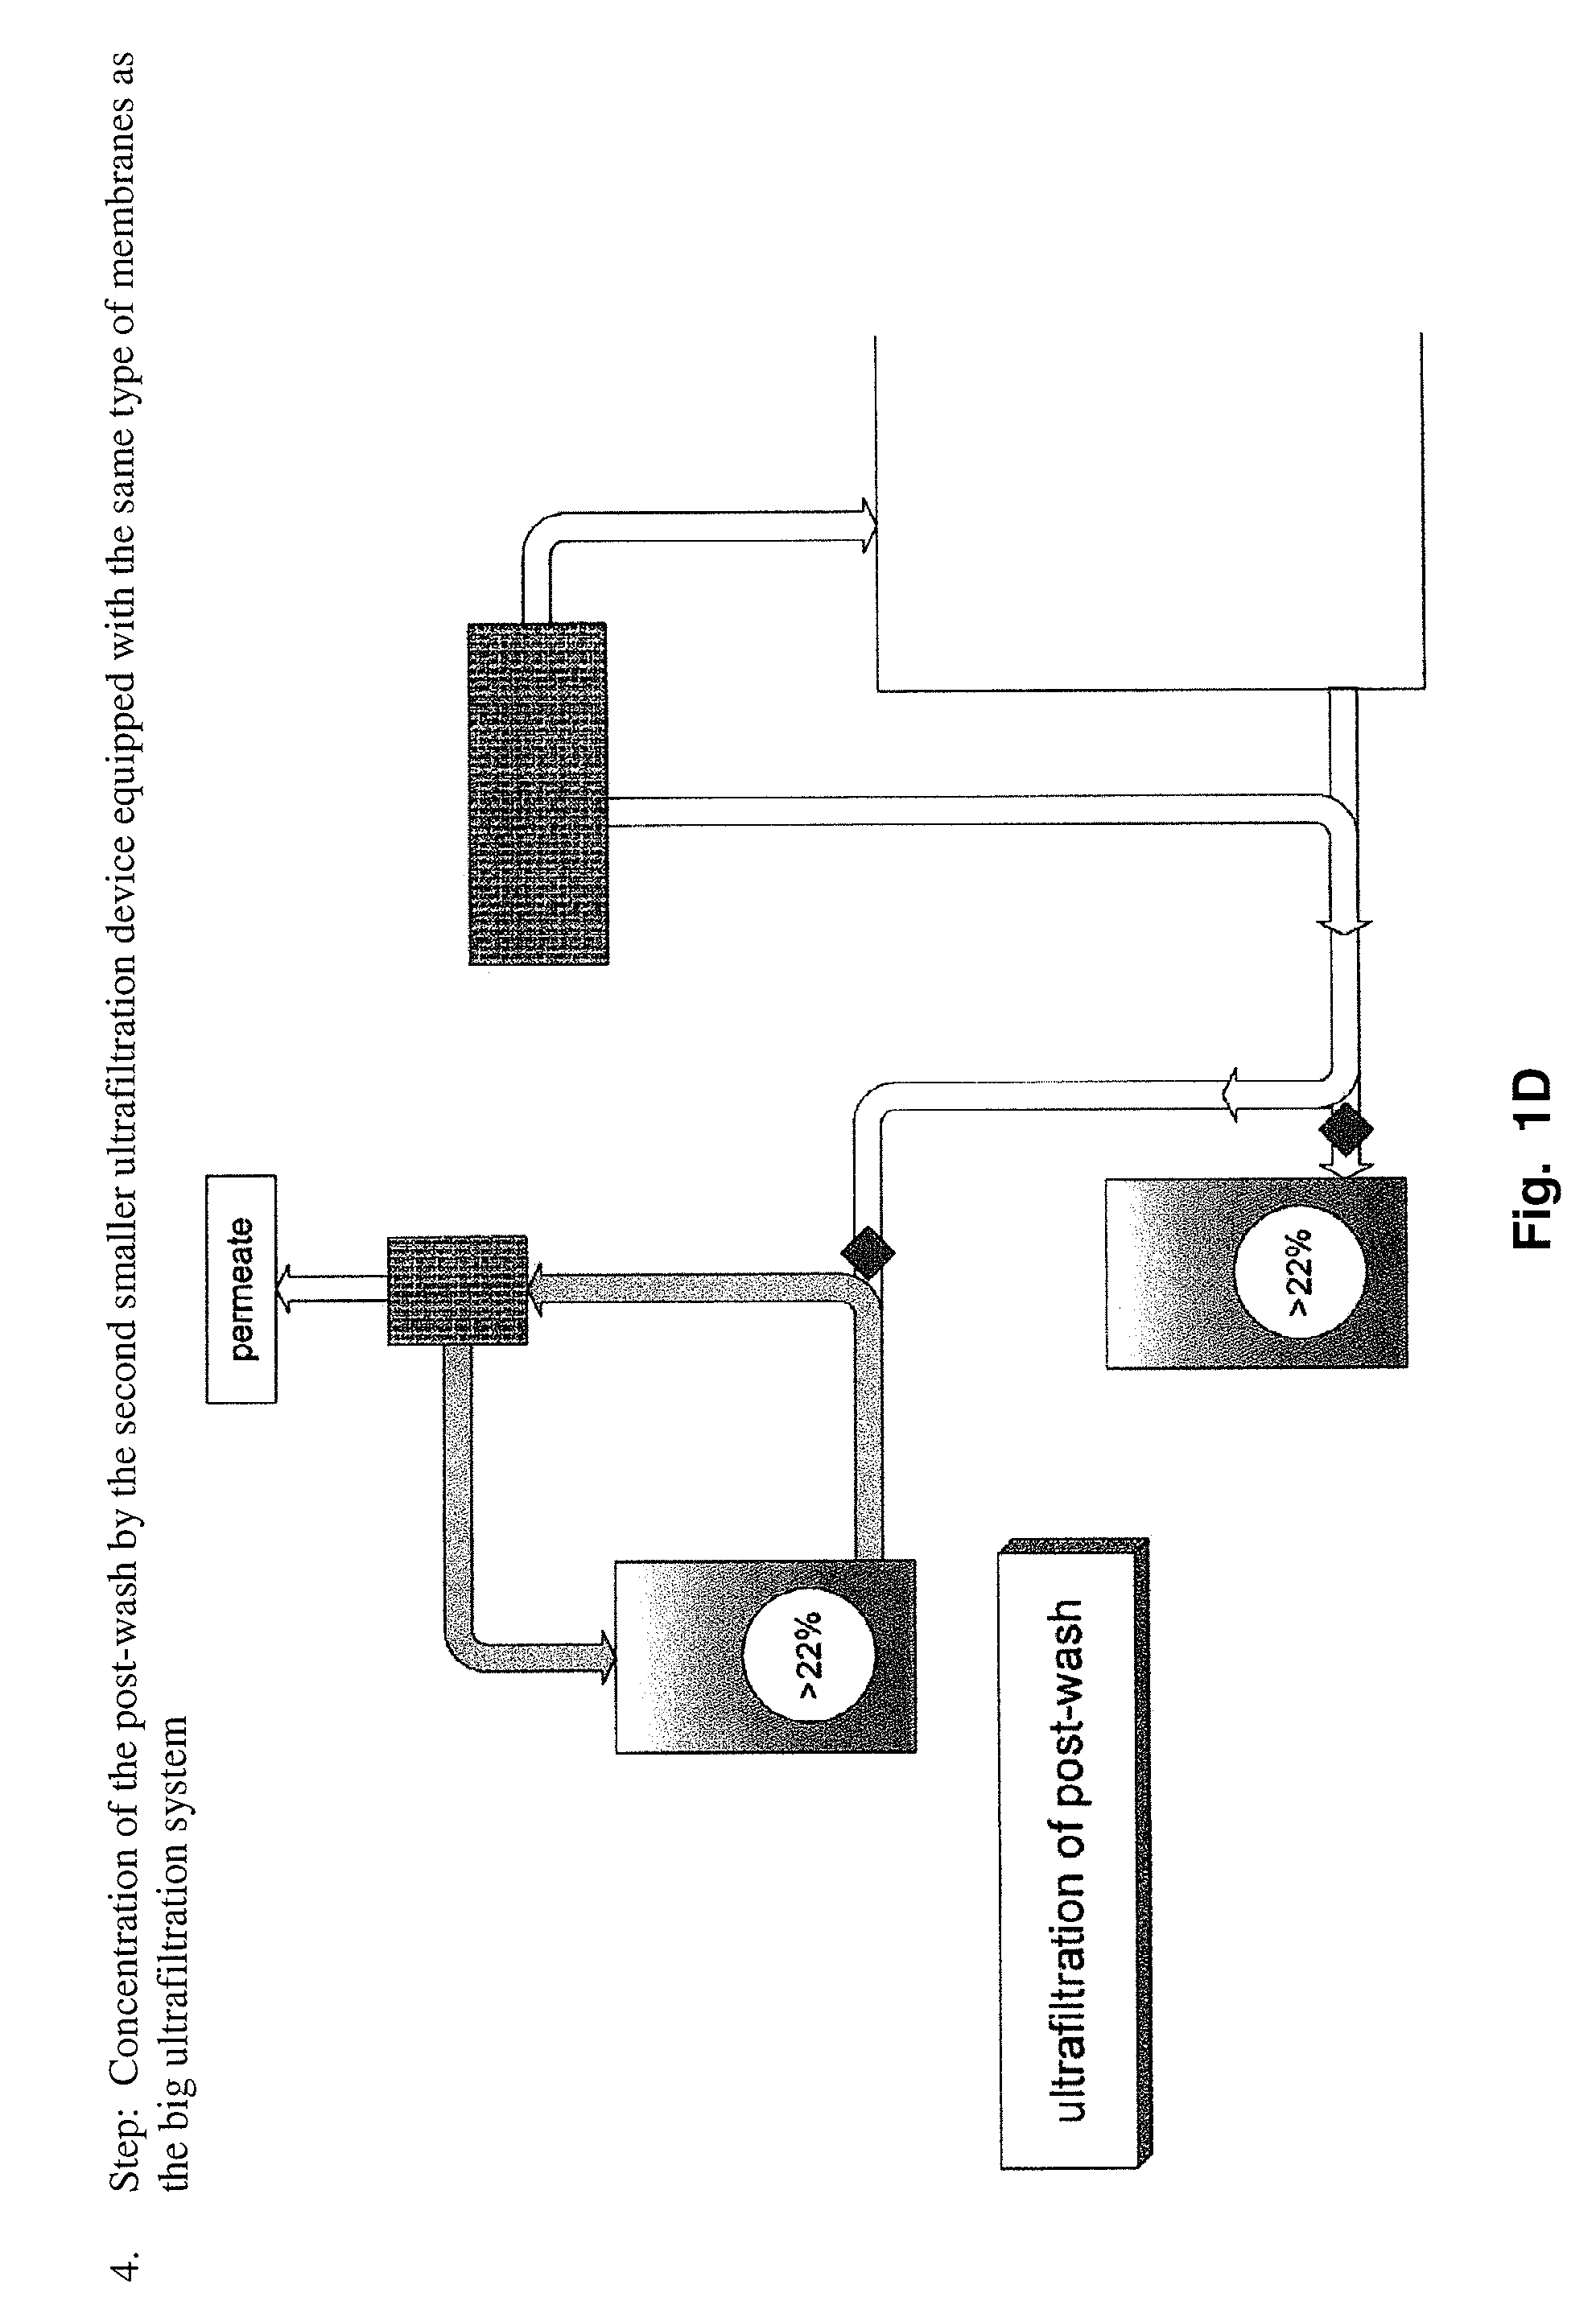 Method to produce a highly concentrated immunoglobulin preparation for subcutaneous use